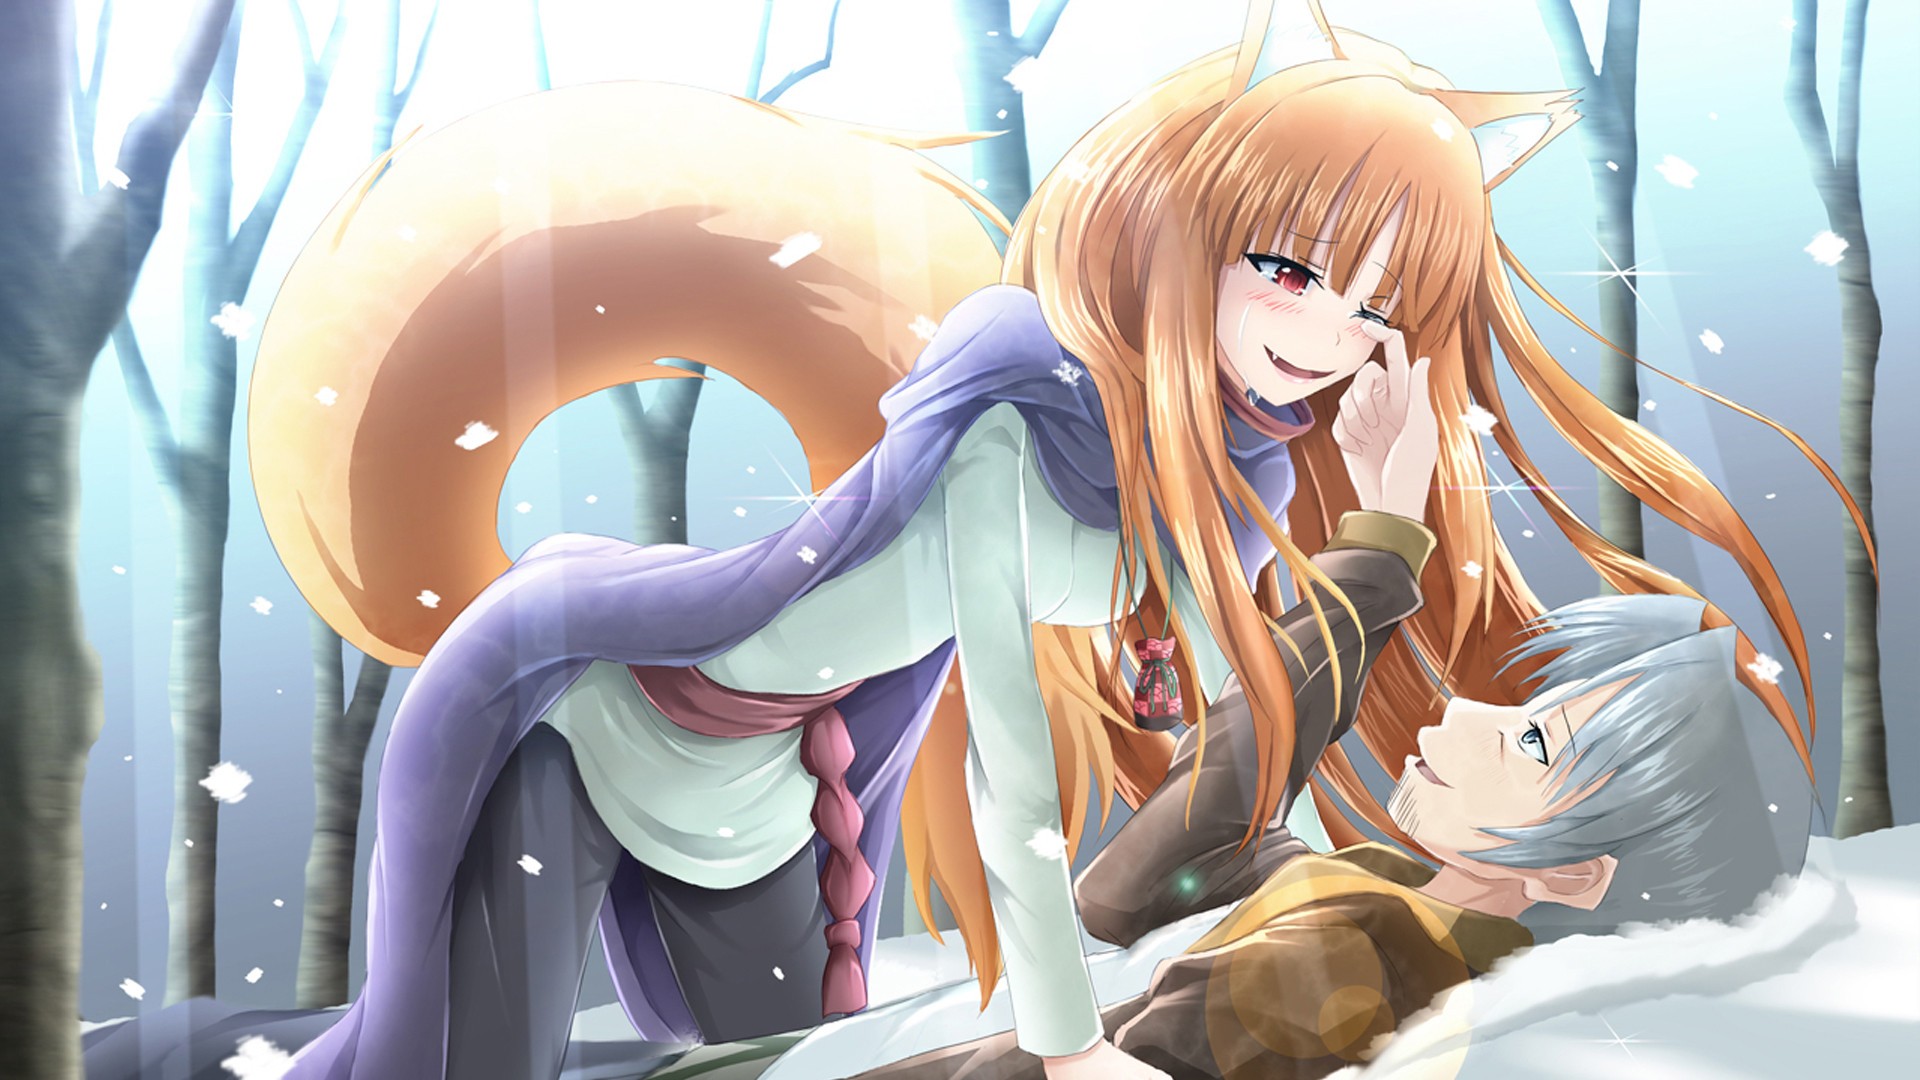 Anime 1920x1080 anime girls anime Spice and Wolf Holo (Spice and Wolf) wolf girls lawrence fantasy art fantasy girl anime boys couple tail winter snow women outdoors forest trees sunlight cape Purple Cape